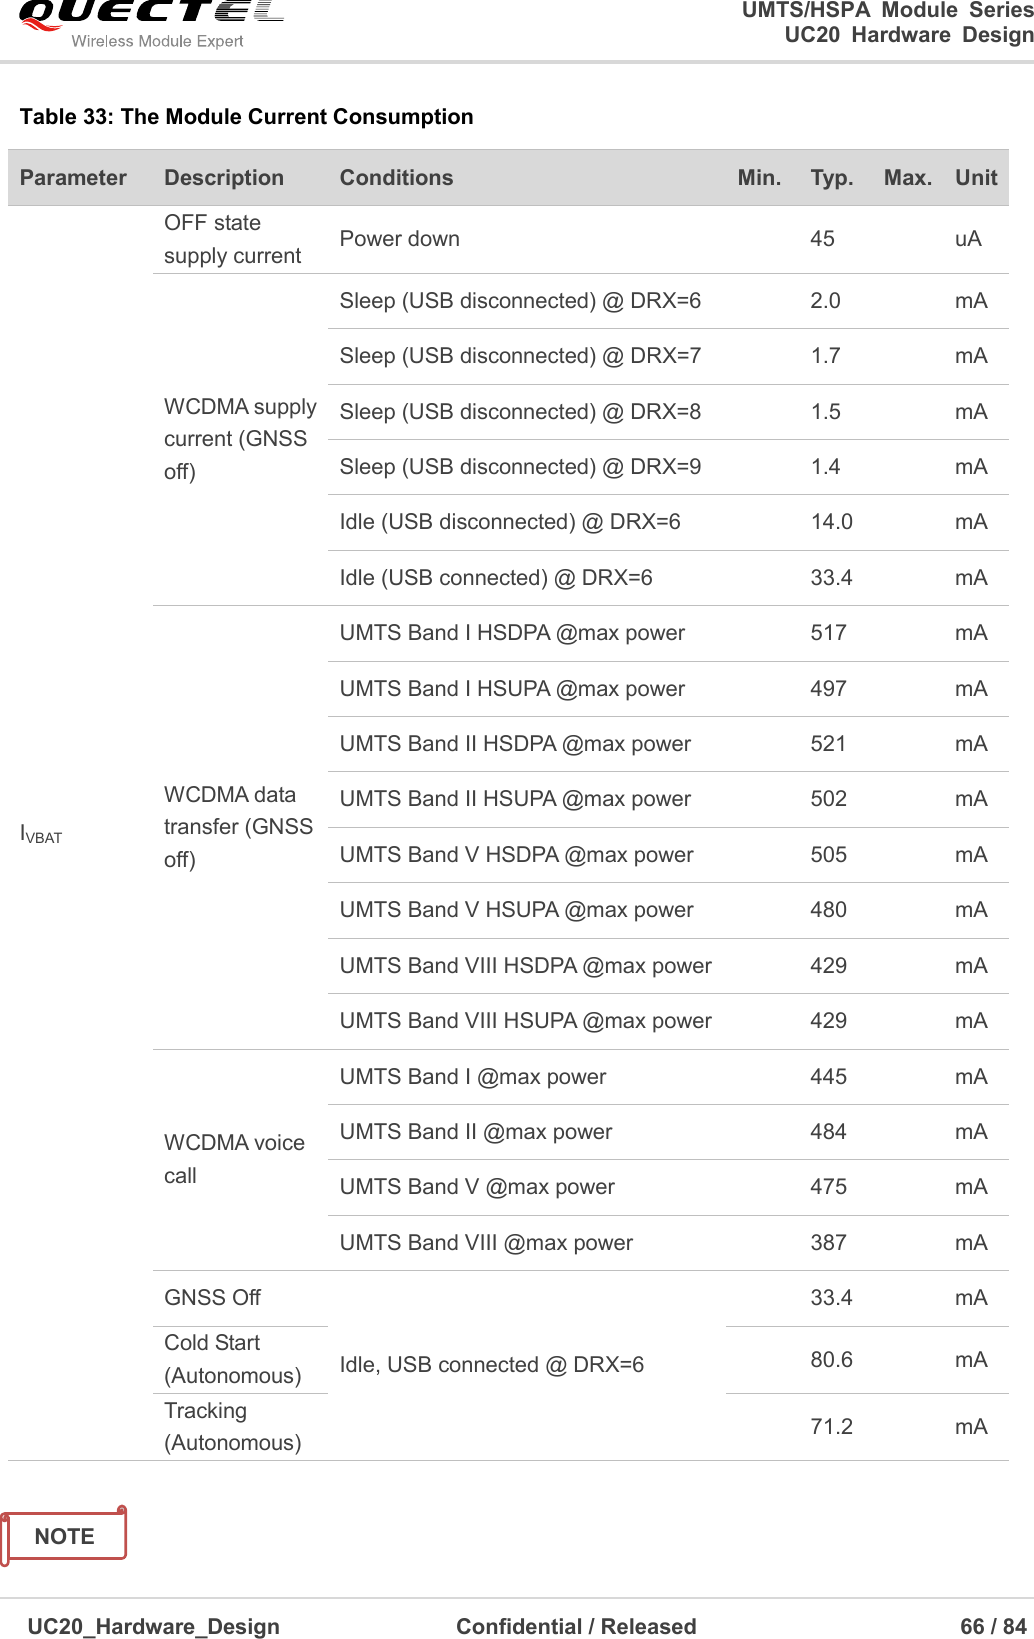                                                                                                                                               UMTS/HSPA  Module  Series                                                                 UC20  Hardware  Design  UC20_Hardware_Design                  Confidential / Released                            66 / 84     Table 33: The Module Current Consumption   Parameter Description Conditions Min. Typ. Max. Unit IVBAT OFF state supply current Power down  45  uA WCDMA supply current (GNSS off) Sleep (USB disconnected) @ DRX=6  2.0  mA Sleep (USB disconnected) @ DRX=7  1.7  mA Sleep (USB disconnected) @ DRX=8  1.5  mA Sleep (USB disconnected) @ DRX=9  1.4  mA Idle (USB disconnected) @ DRX=6  14.0  mA Idle (USB connected) @ DRX=6  33.4  mA WCDMA data transfer (GNSS off) UMTS Band I HSDPA @max power  517  mA UMTS Band I HSUPA @max power  497  mA UMTS Band II HSDPA @max power  521  mA UMTS Band II HSUPA @max power  502  mA UMTS Band V HSDPA @max power  505  mA UMTS Band V HSUPA @max power  480  mA UMTS Band VIII HSDPA @max power    429  mA UMTS Band VIII HSUPA @max power    429  mA WCDMA voice call UMTS Band I @max power  445  mA UMTS Band II @max power  484  mA UMTS Band V @max power  475  mA UMTS Band VIII @max power  387  mA GNSS Off   Idle, USB connected @ DRX=6  33.4  mA Cold Start (Autonomous)  80.6  mA Tracking (Autonomous)  71.2  mA NOTE 